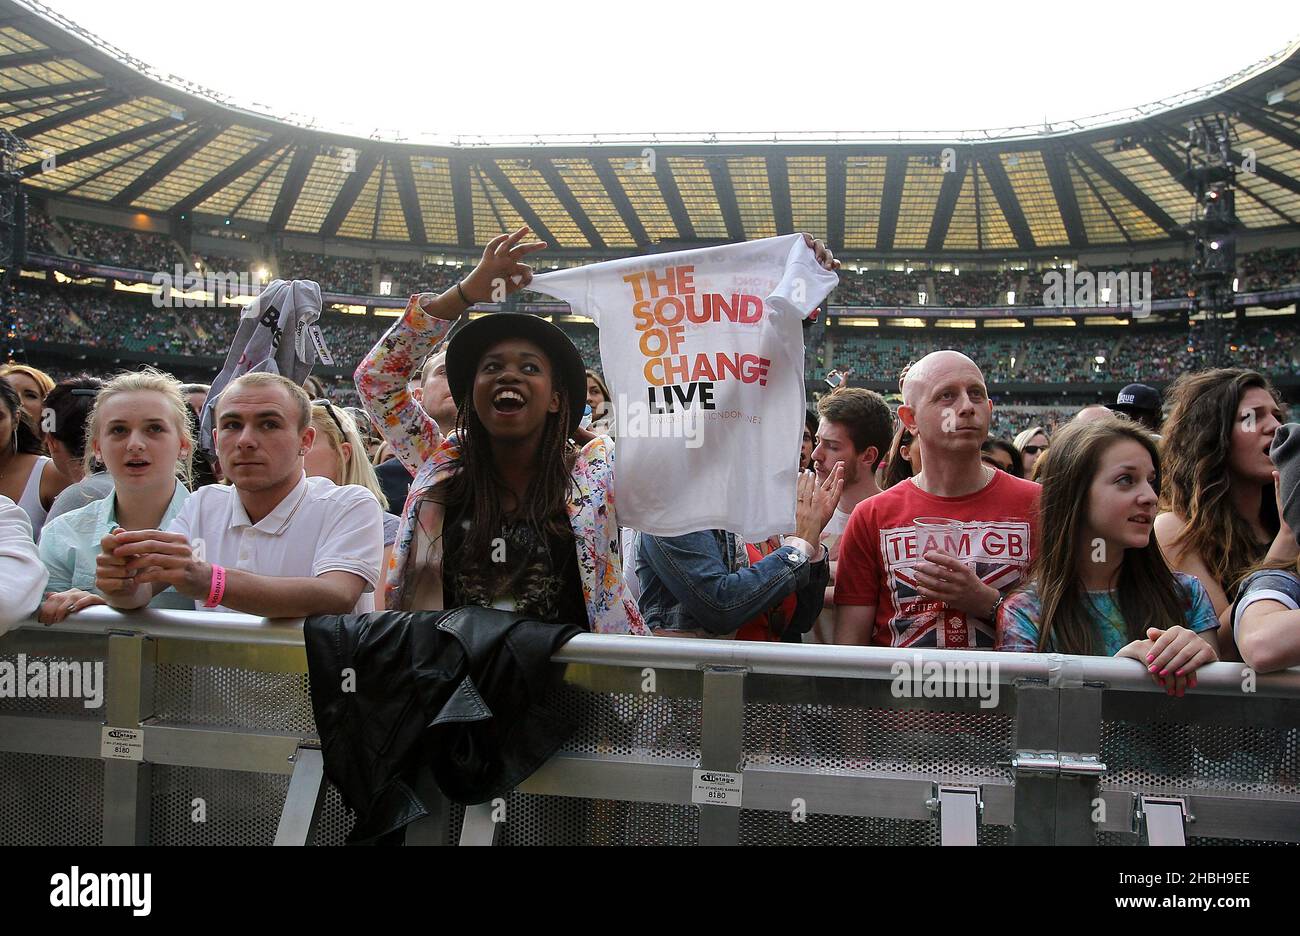 Crowd Fans at Sound of Change Live Concert at Chime for Change at Twickenham, London. Stock Photo